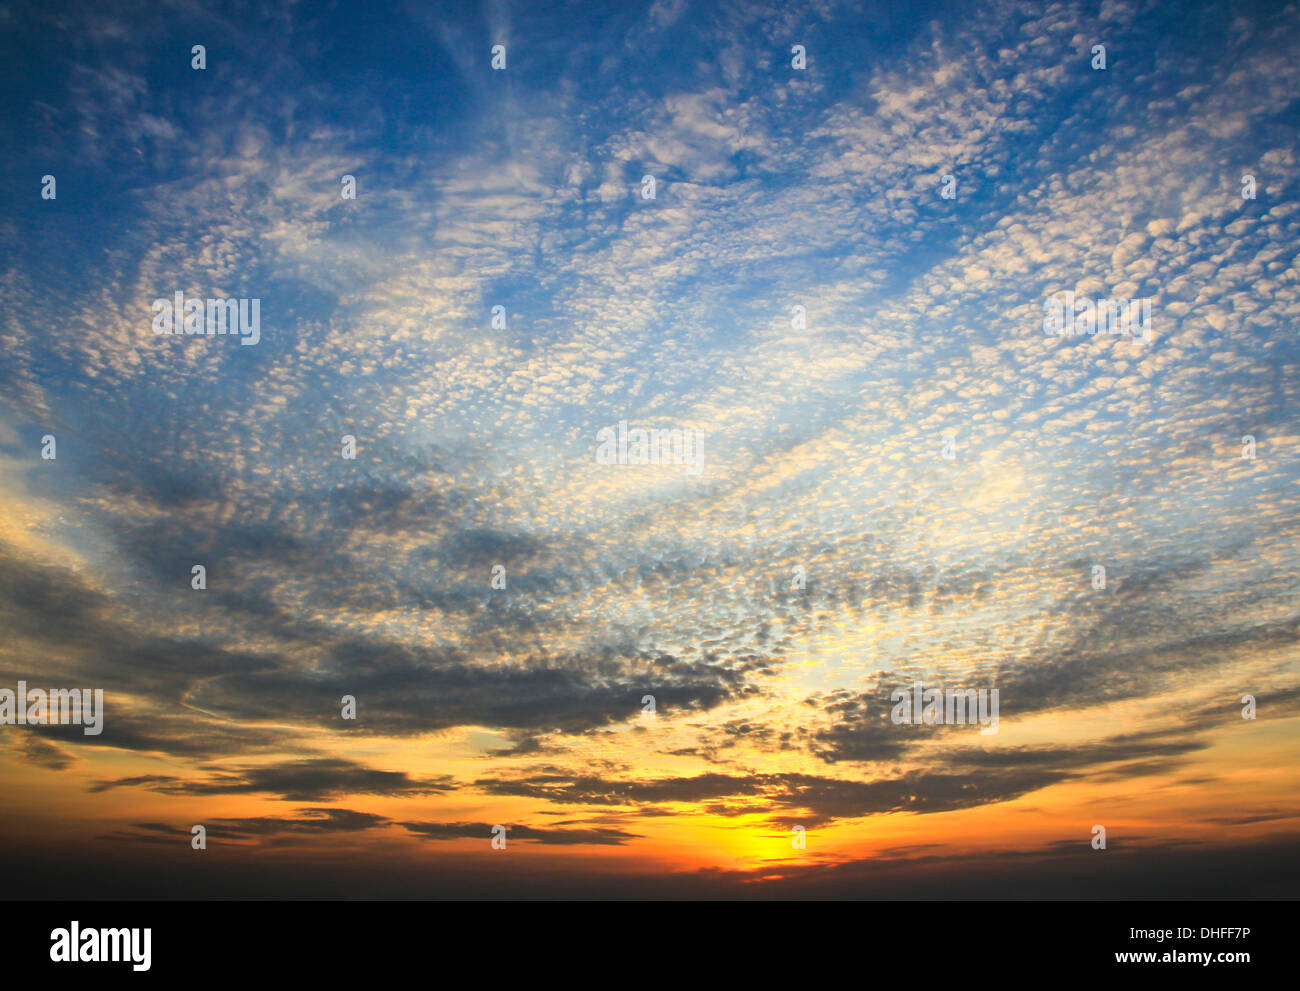 Dramatic sunset sky with clouds Stock Photo